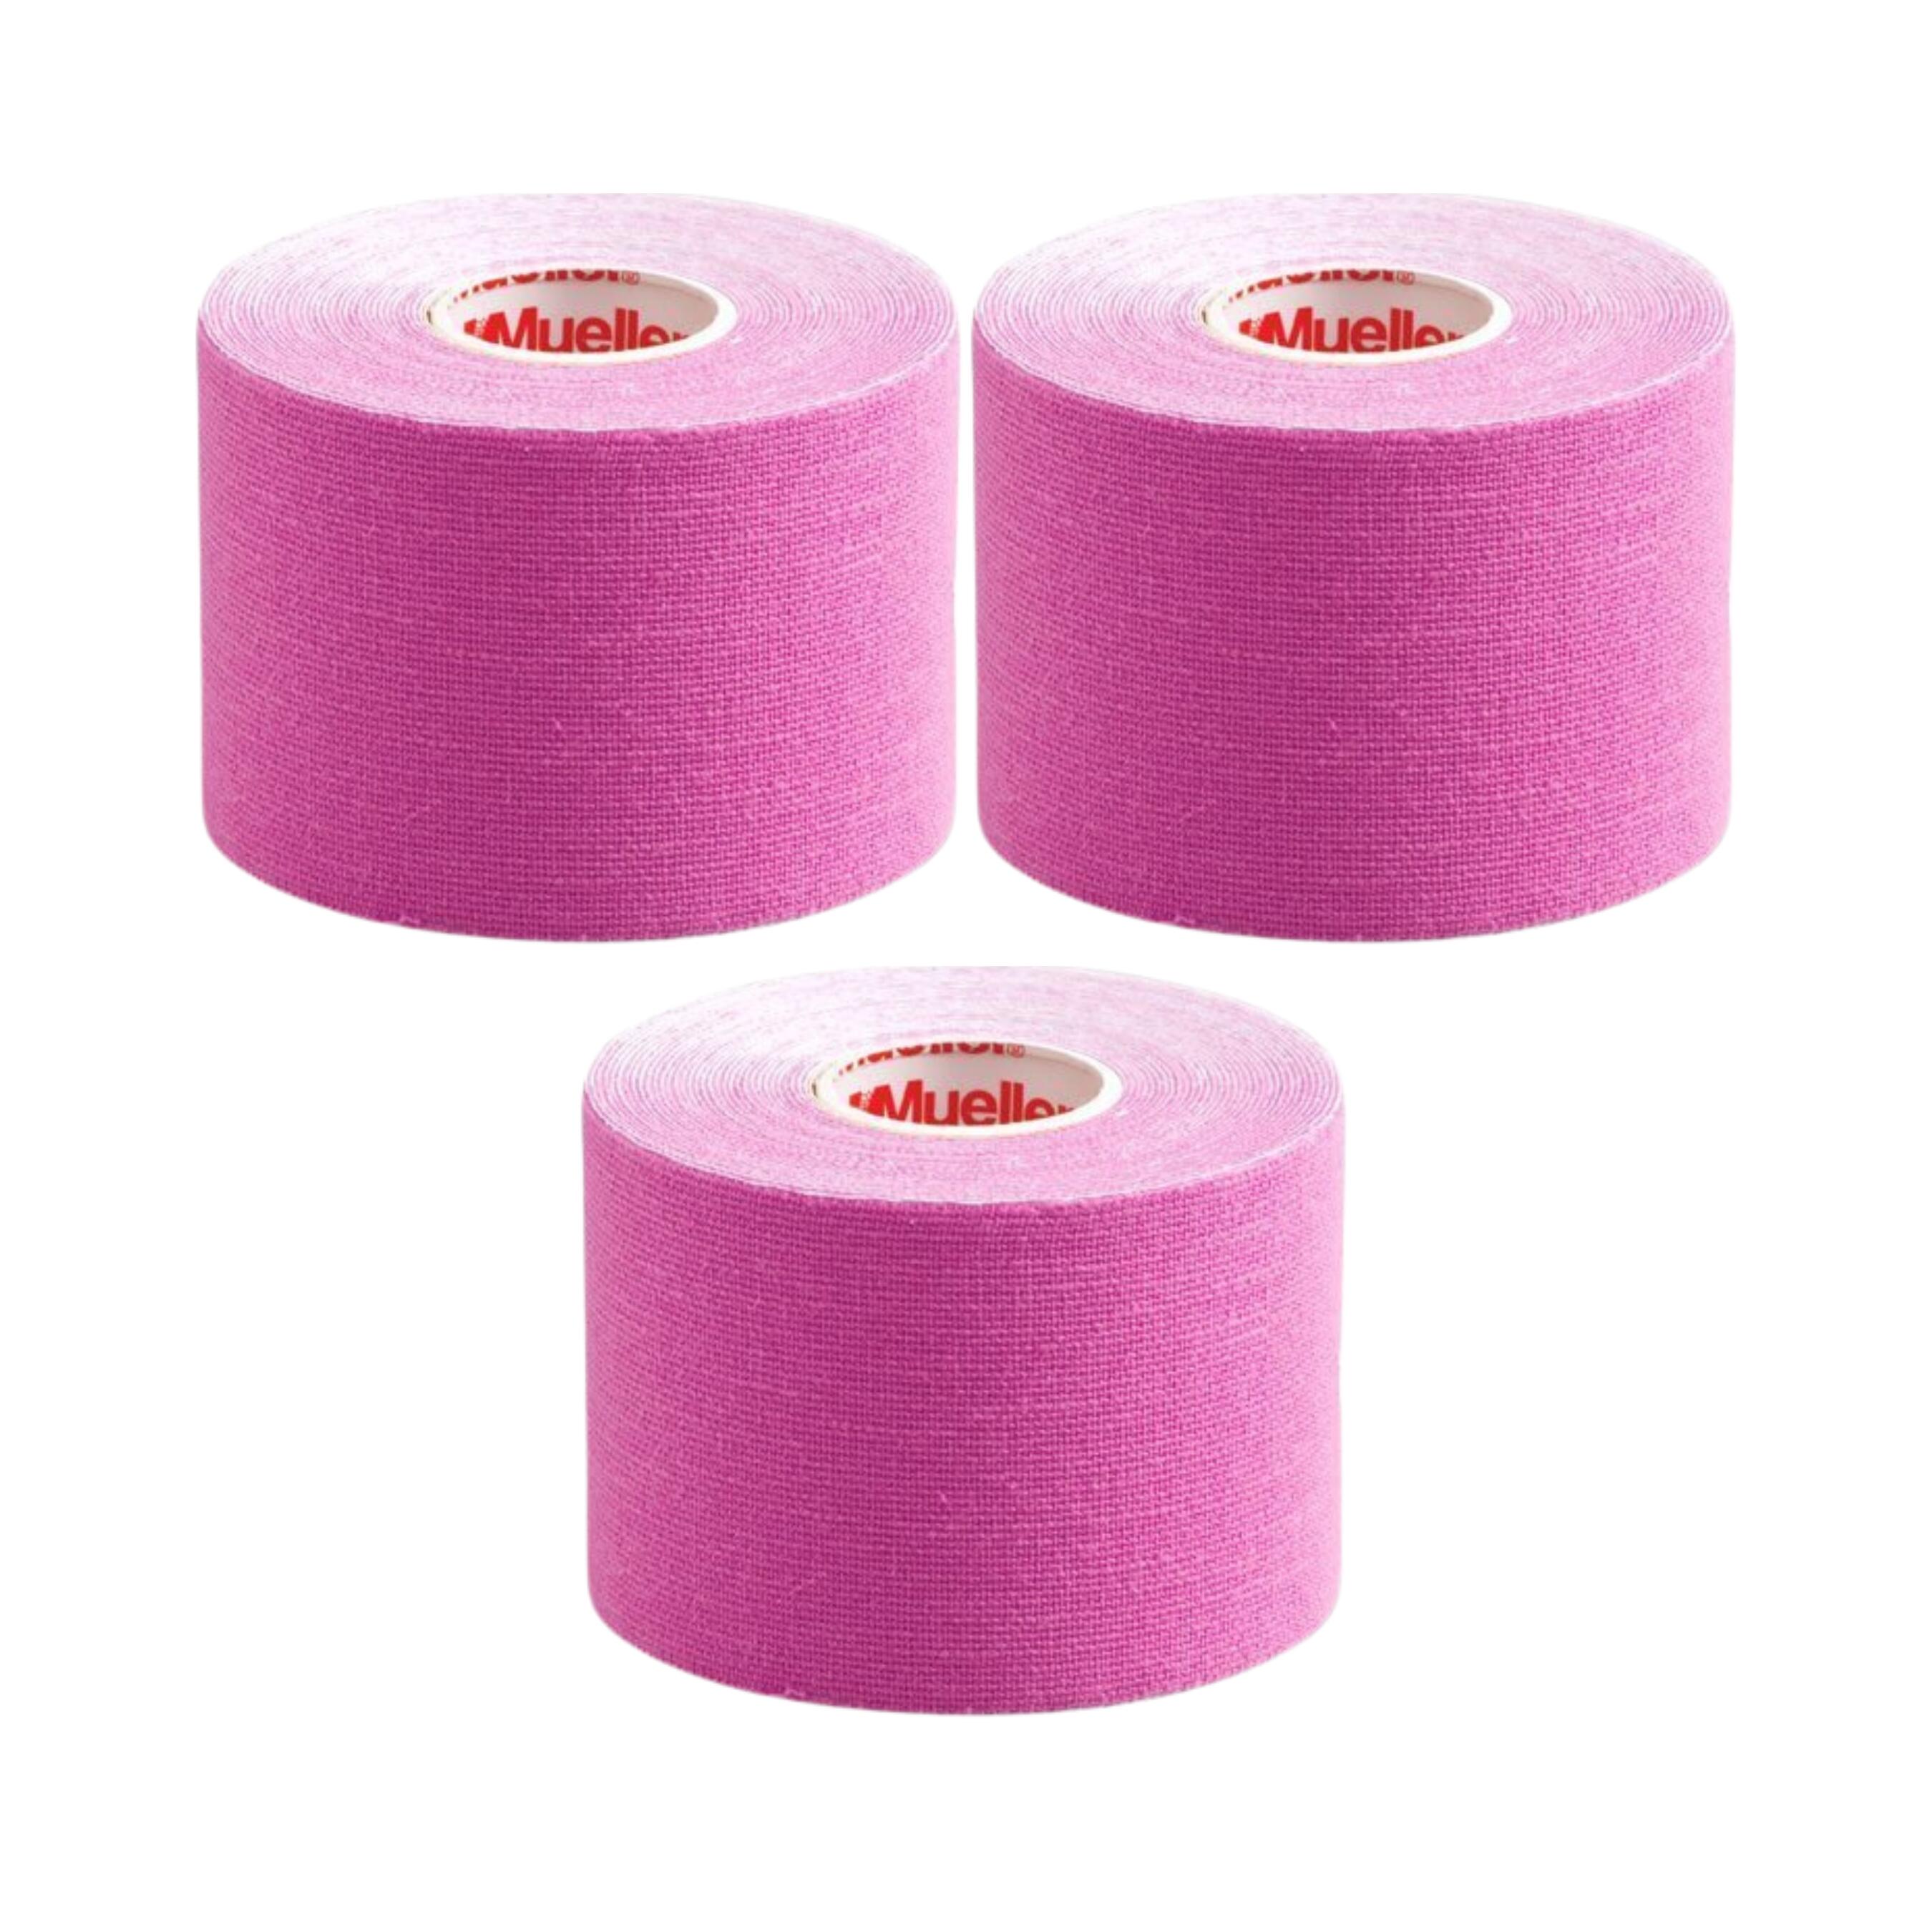 MUELLER Mueller Kinesiology Tape - Latex Free Cotton 5cm X 5m (Pack of 3) - Pink